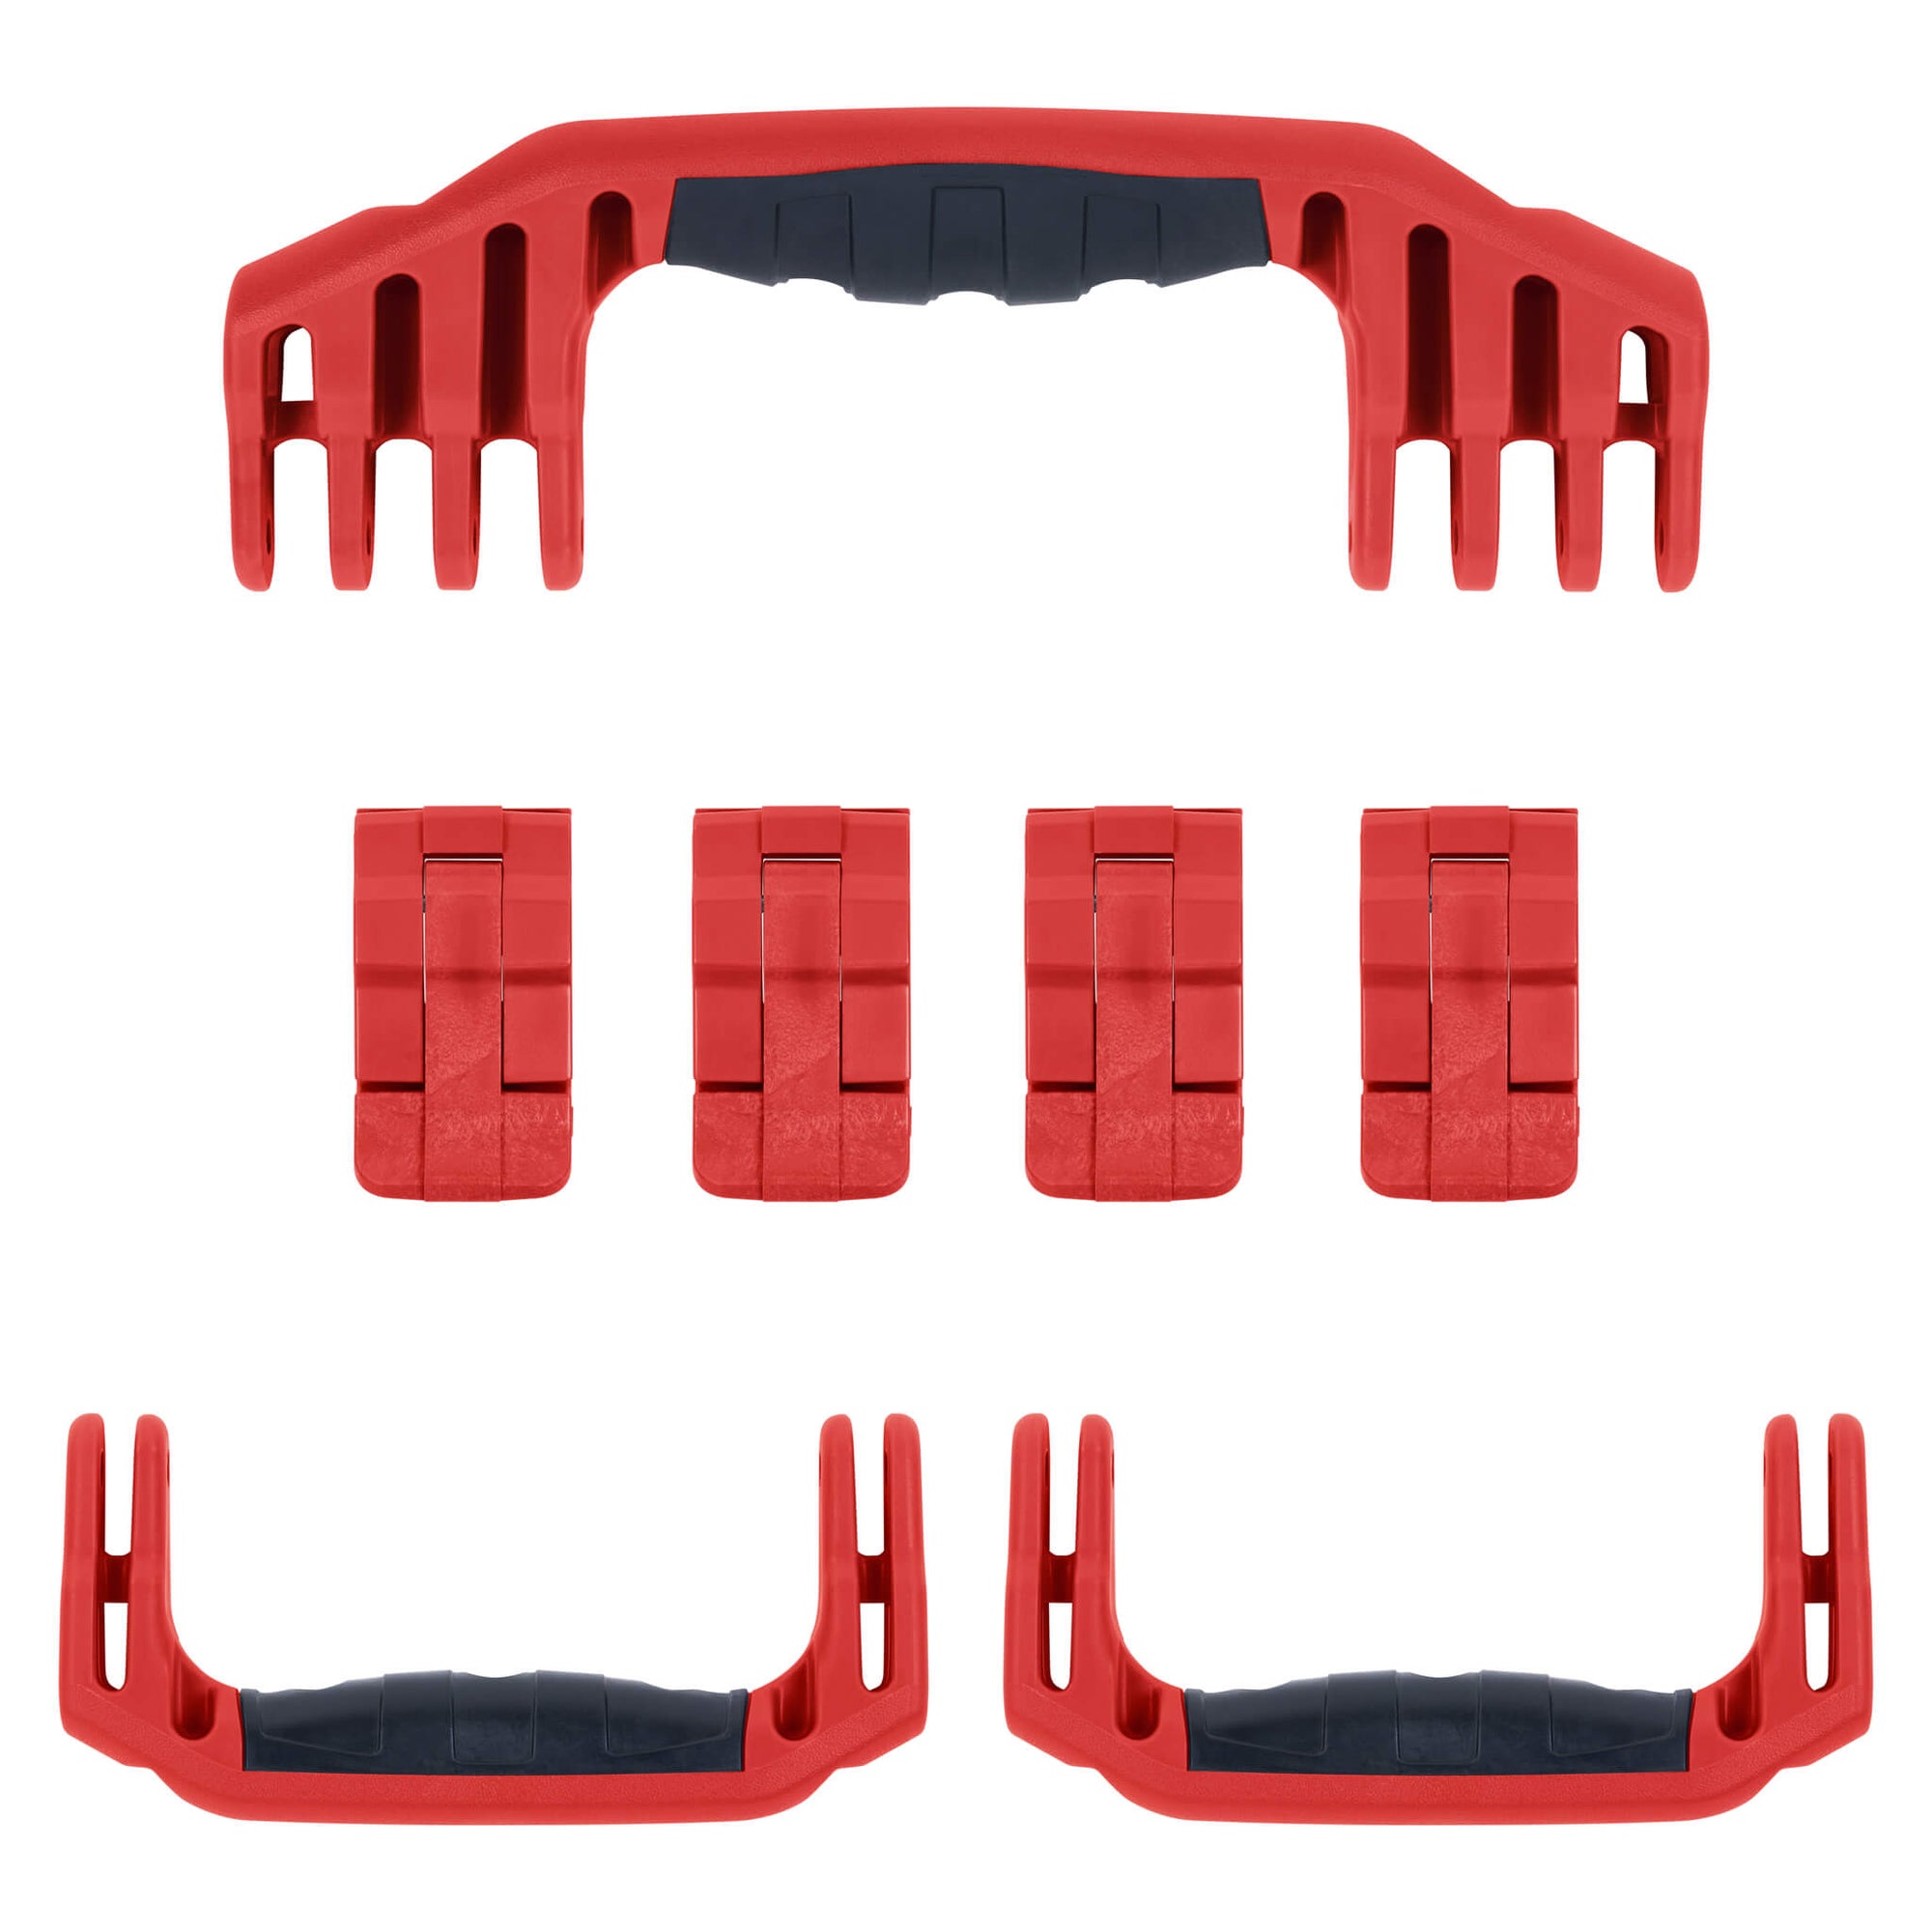 Pelican 1610 Replacement Handles & Latches, Red (Set of 3 Handles, 4 Latches) ColorCase 